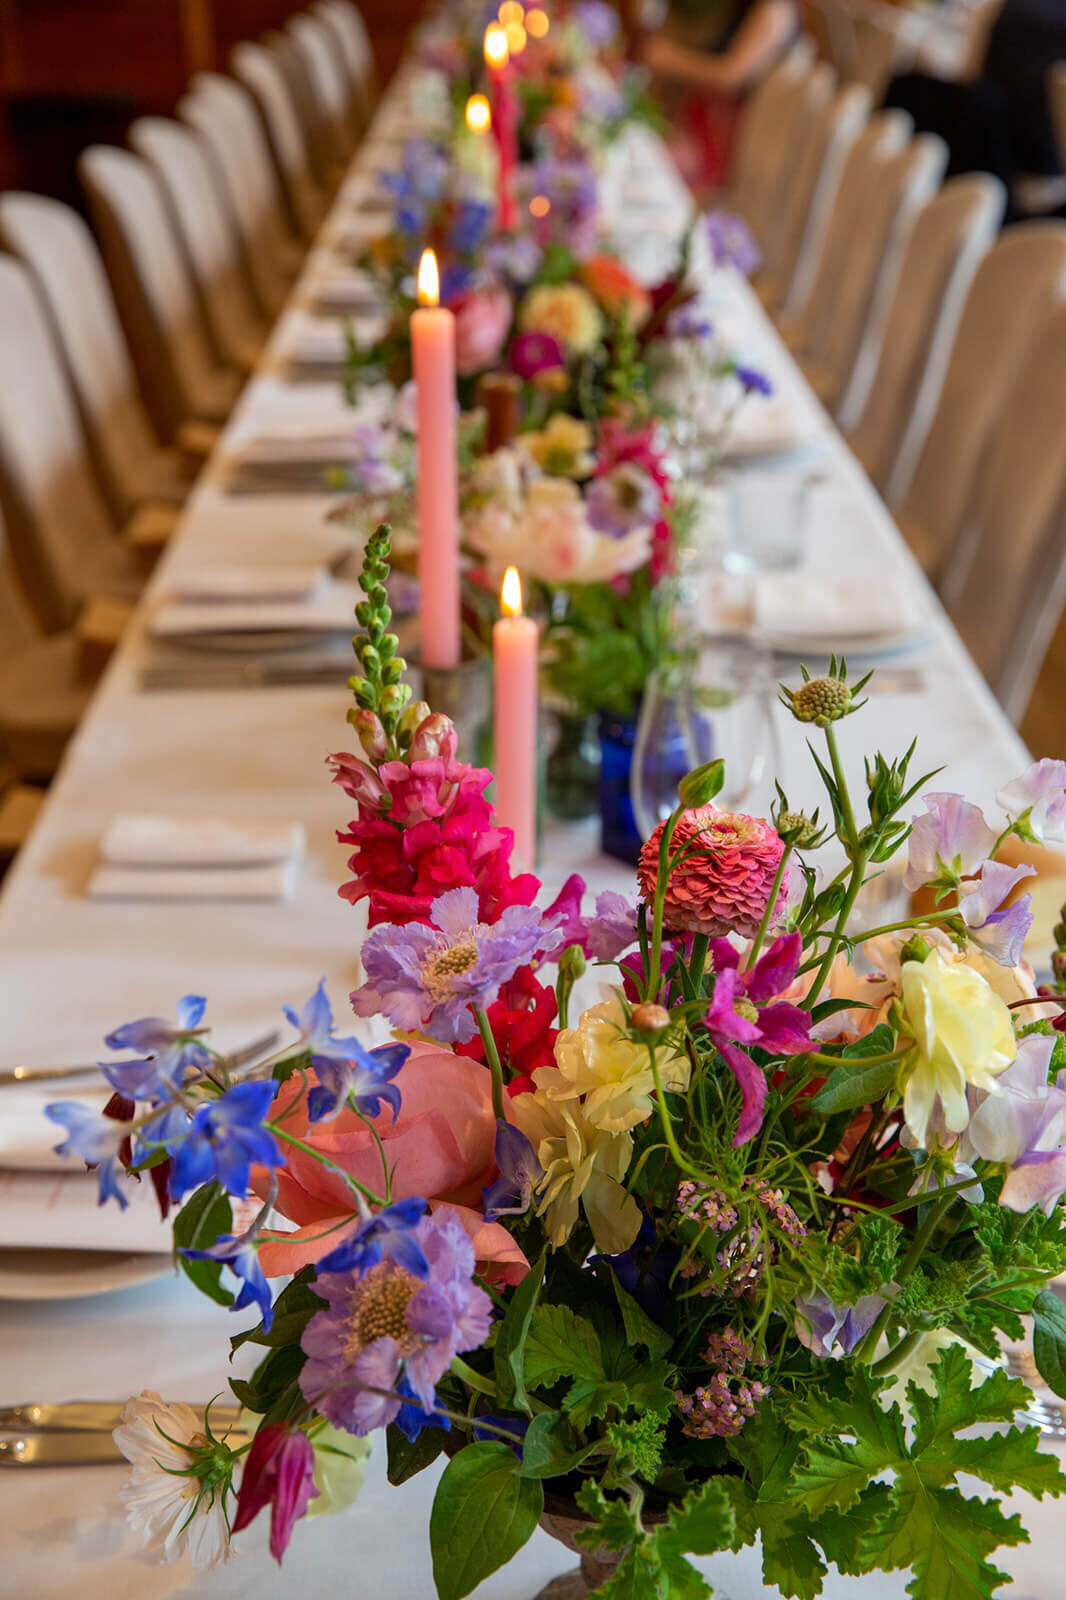 Flowers on wedding breakfast table in Bethal Hall , Town Hall Hotel London